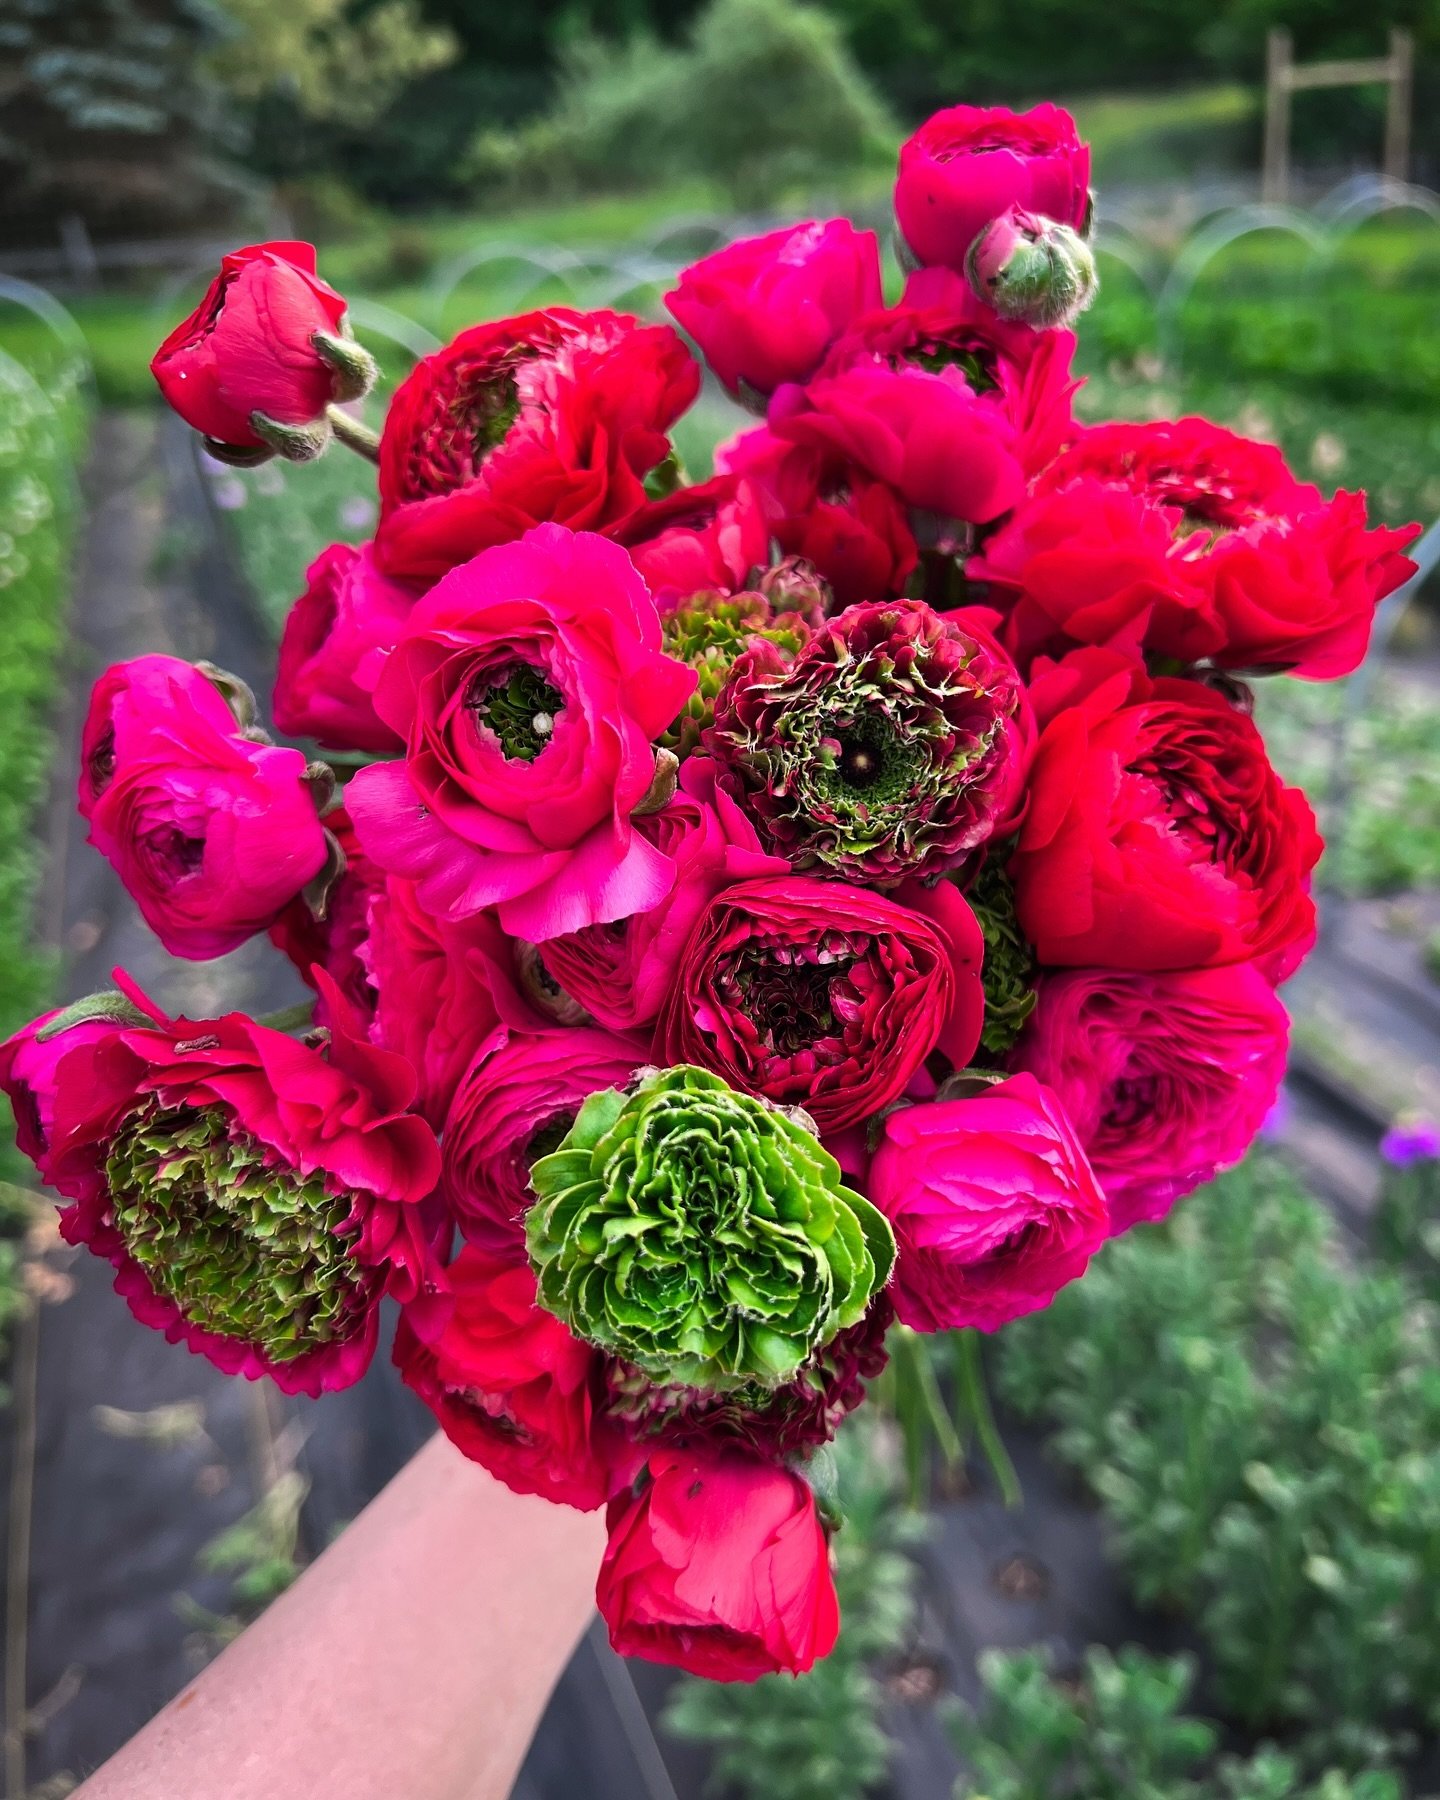 These goofball ranunculus are called &ldquo;Supergreen Rose&rdquo; and have leaves growing from their centers. I wasn&rsquo;t sure how I felt at first but now I&rsquo;m obsessed. Look at that saturated fuscia!
.
.
.
#ranunculus #springflowers #mayfie